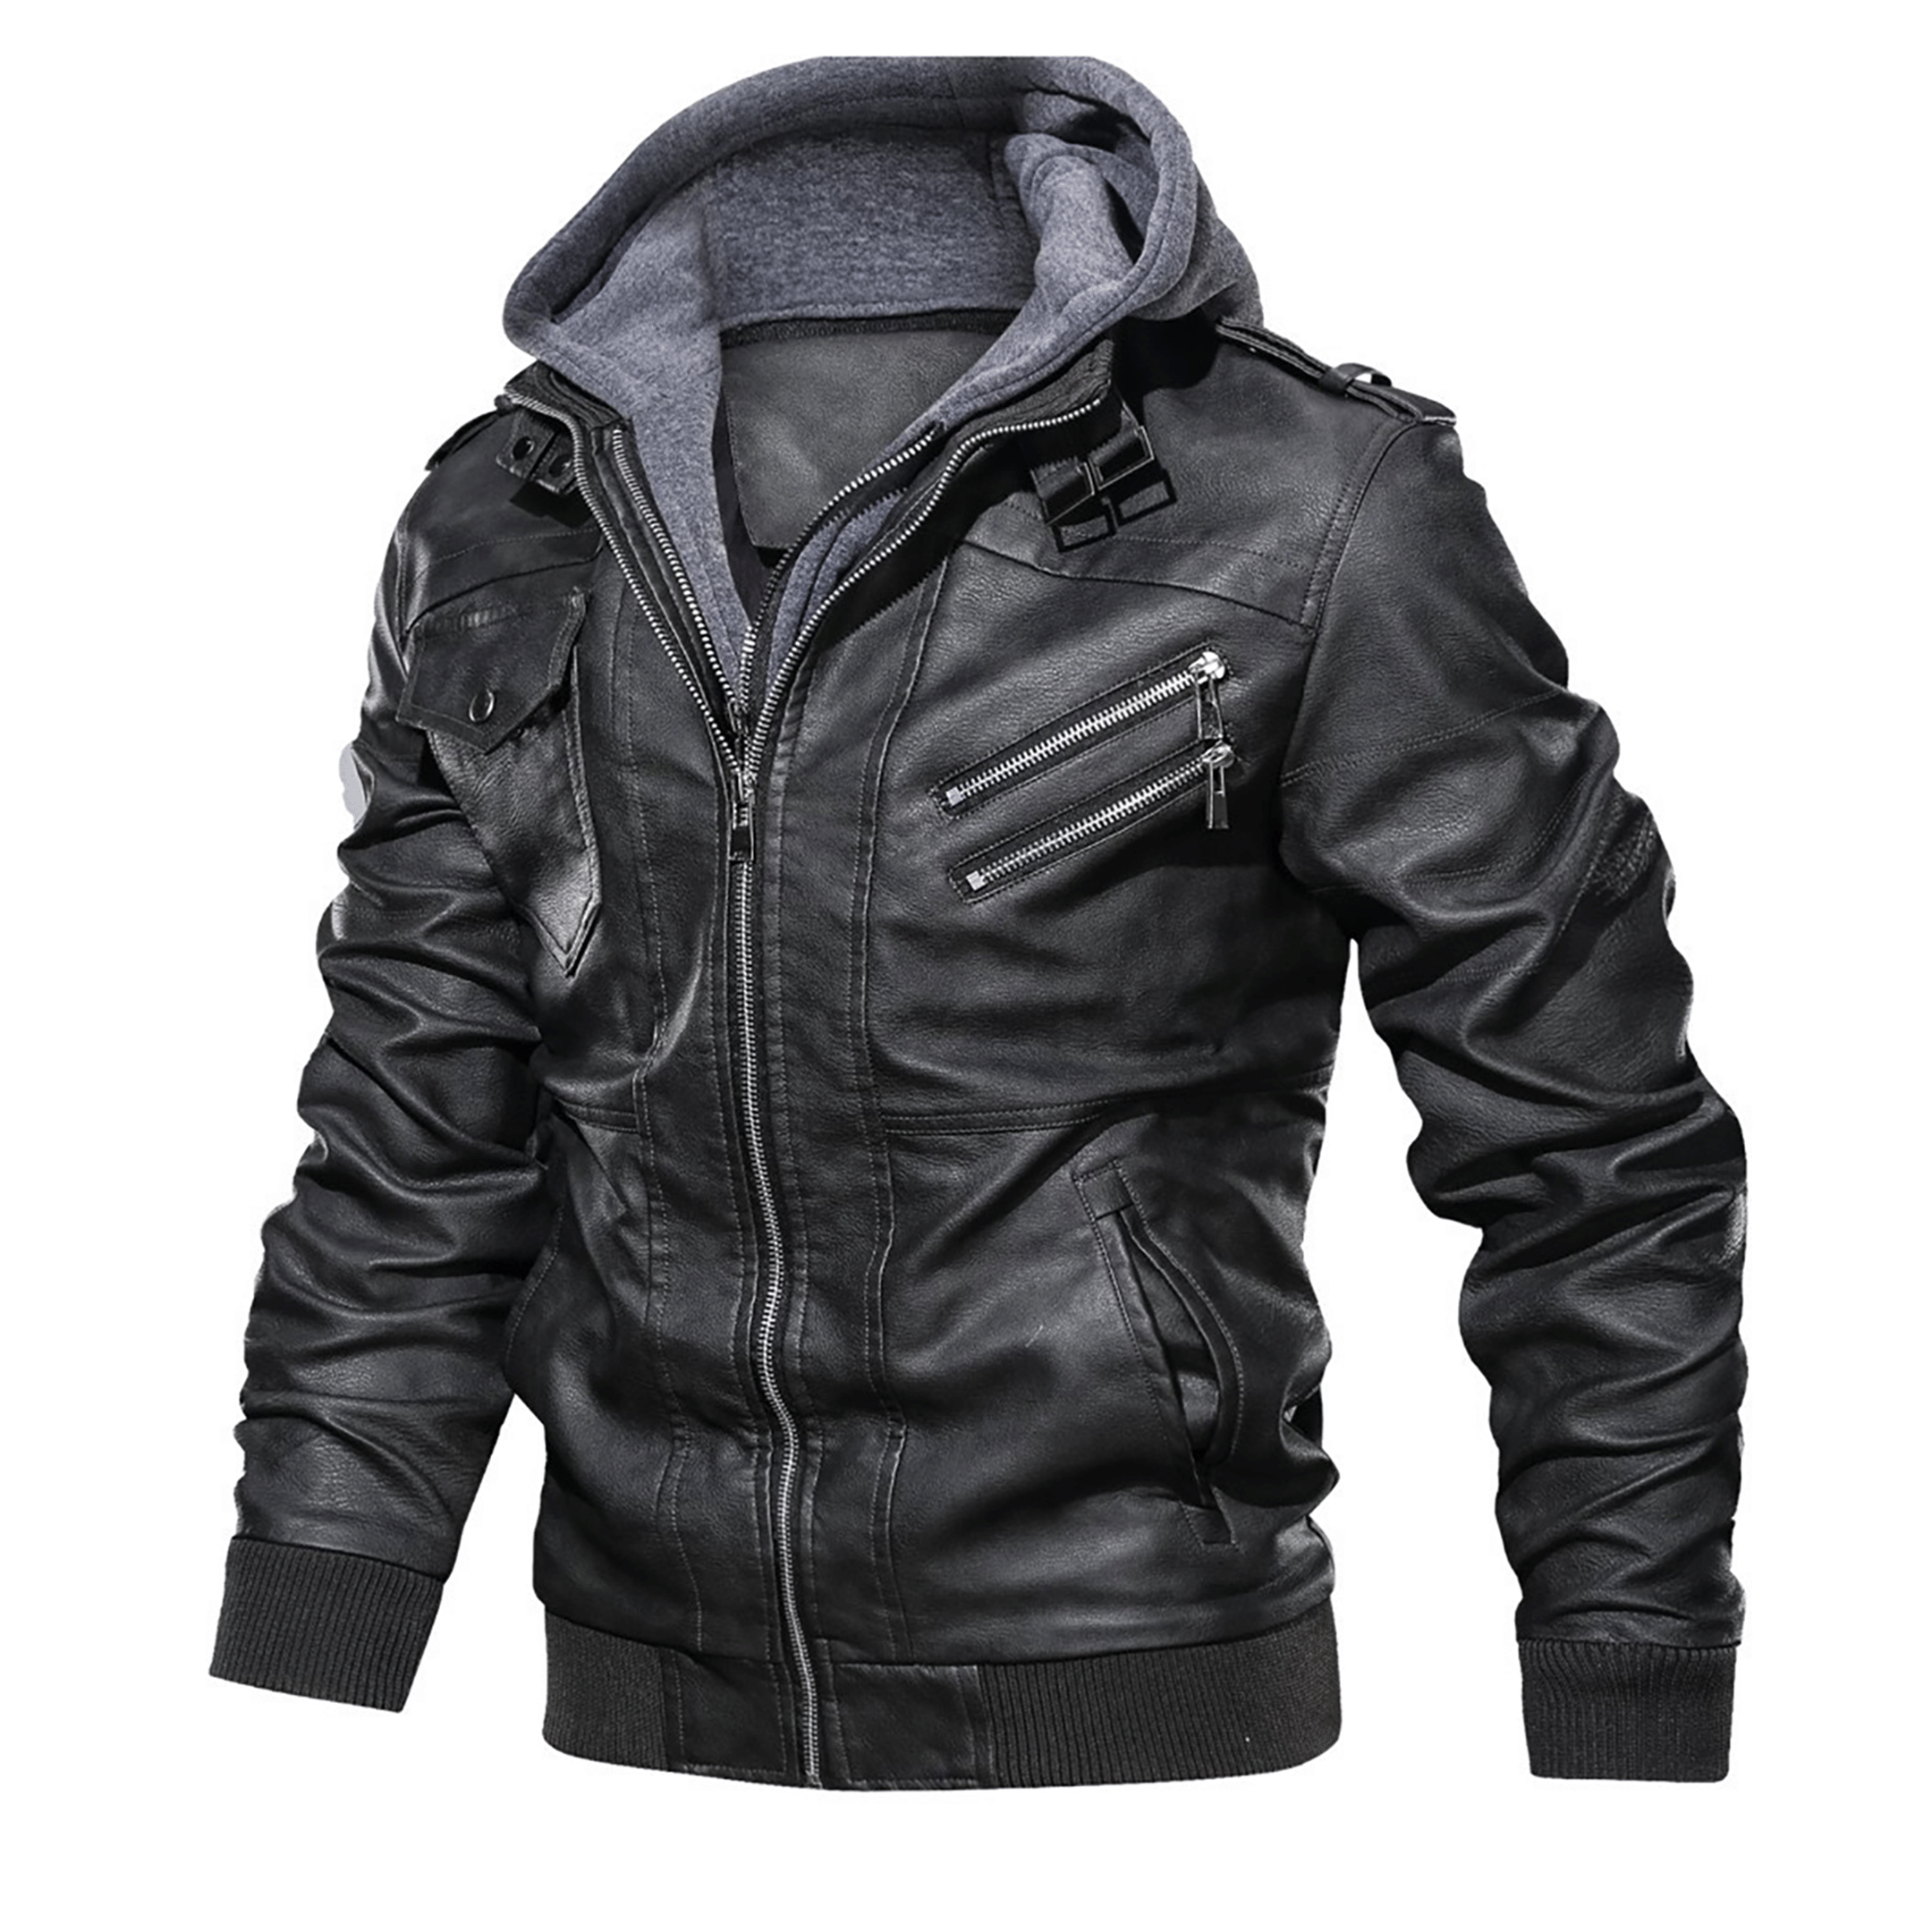 Top leather jackets and latest products 429